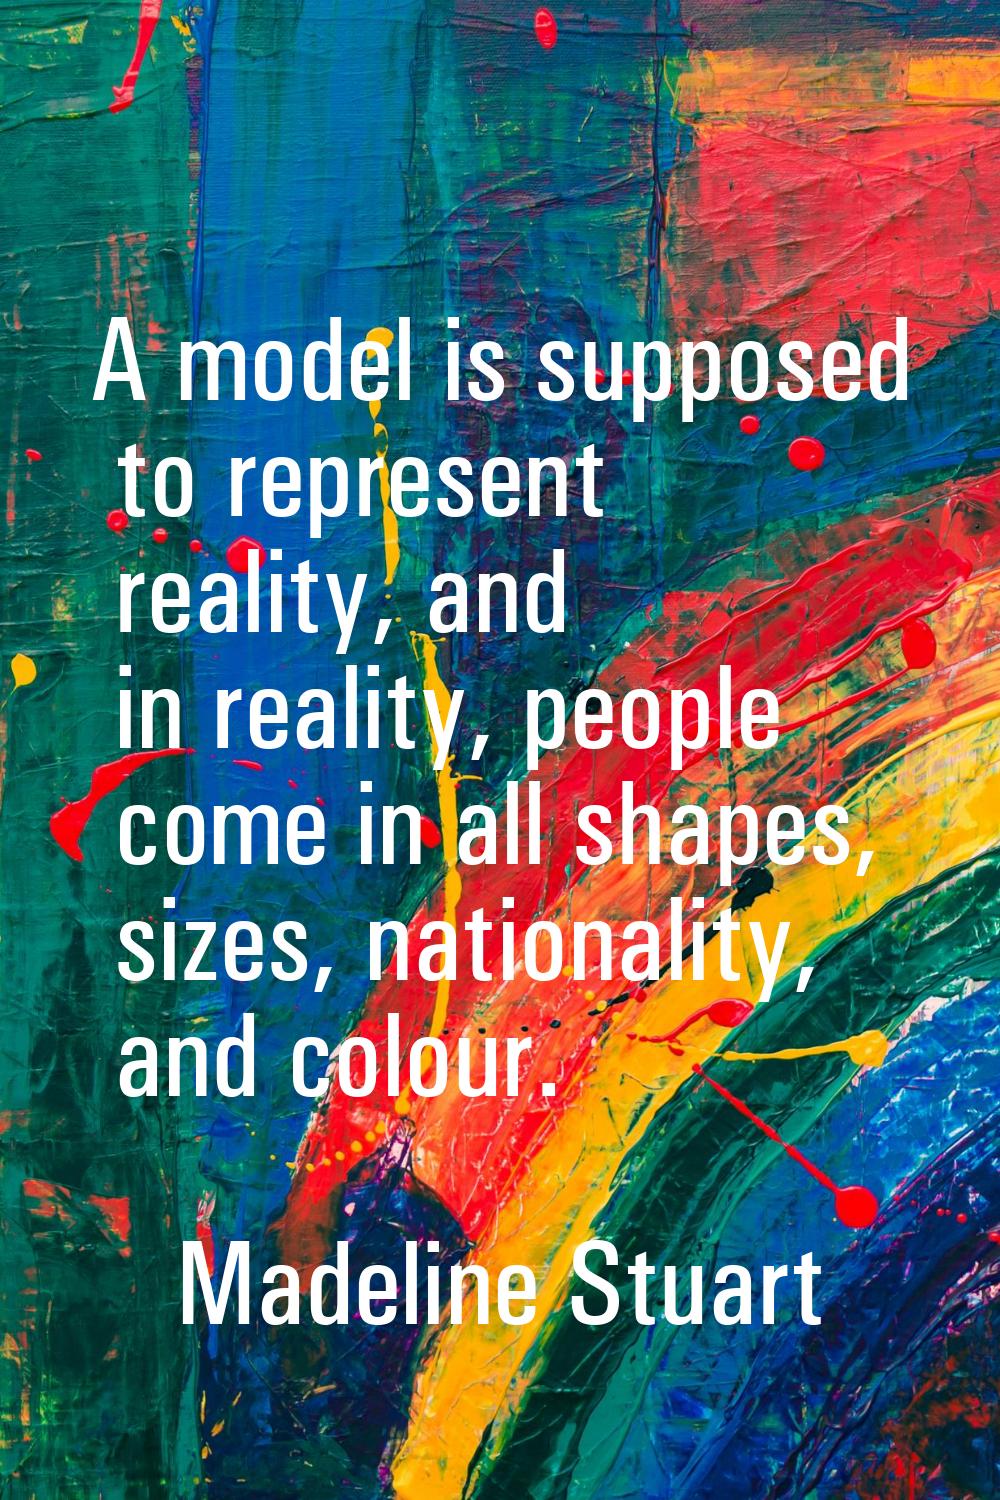 A model is supposed to represent reality, and in reality, people come in all shapes, sizes, nationa